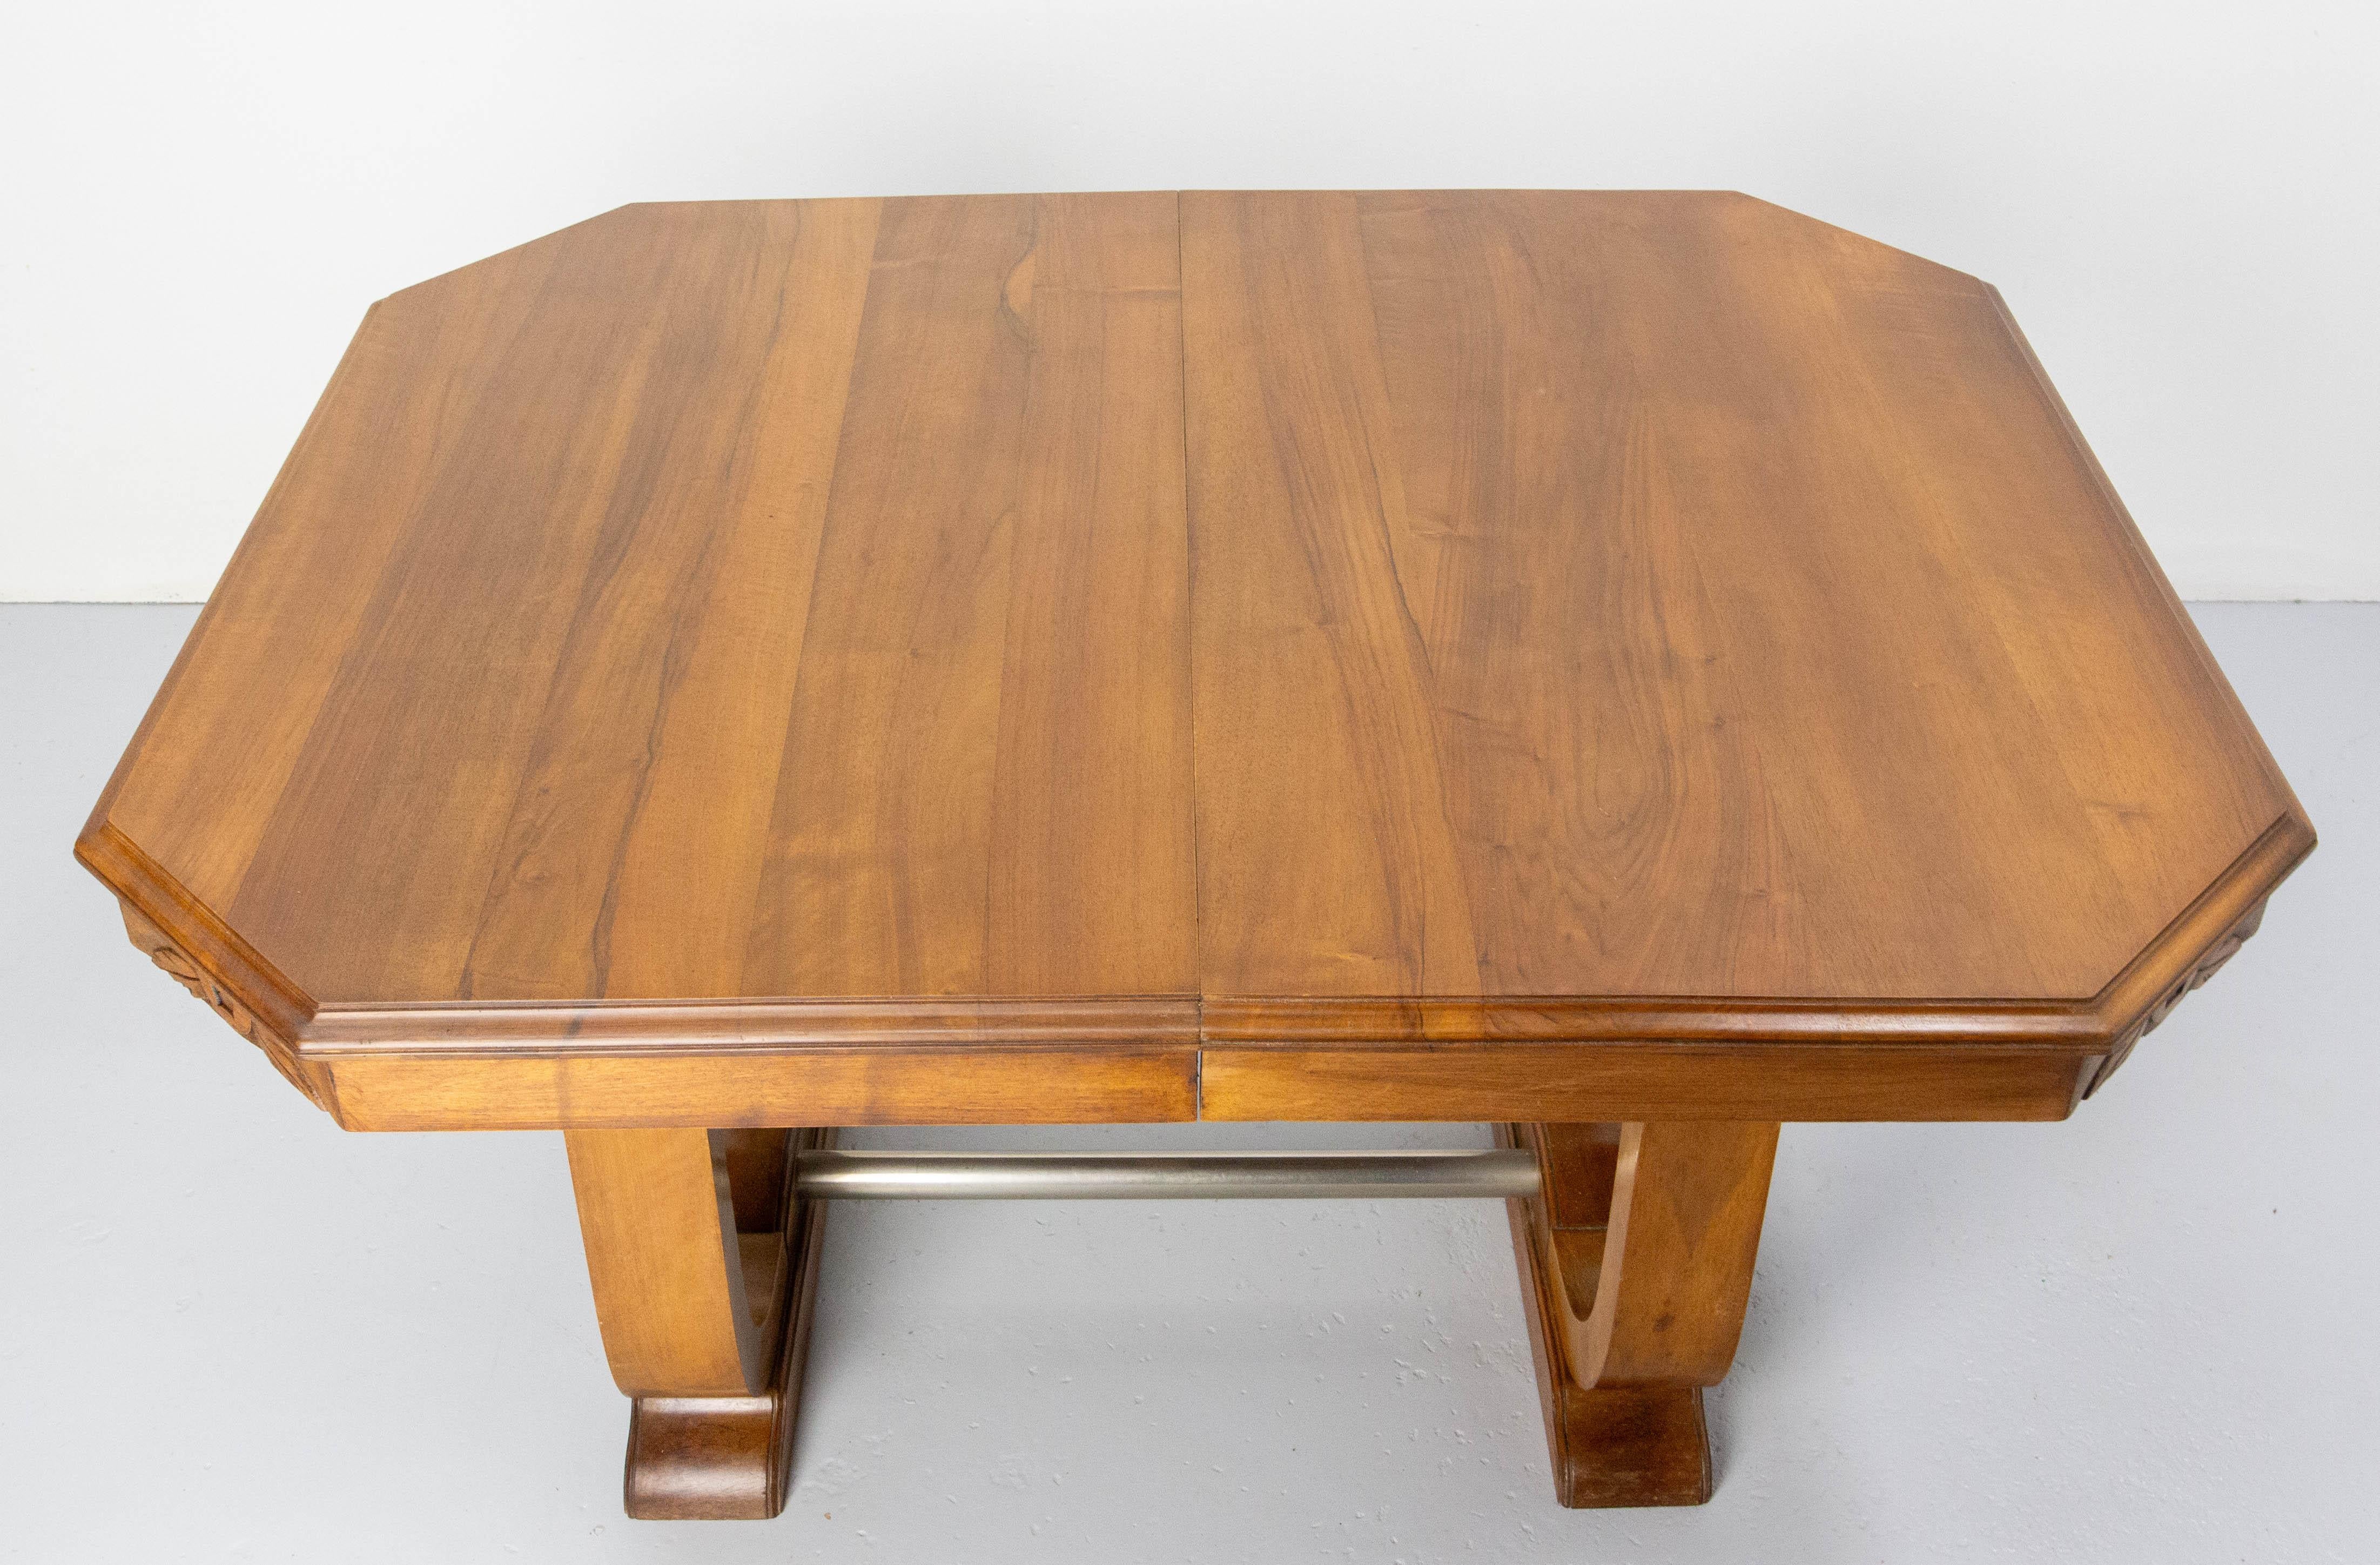 Dining Walnut Table with Central Extension  Art Déco Period, circa 1930 France For Sale 5